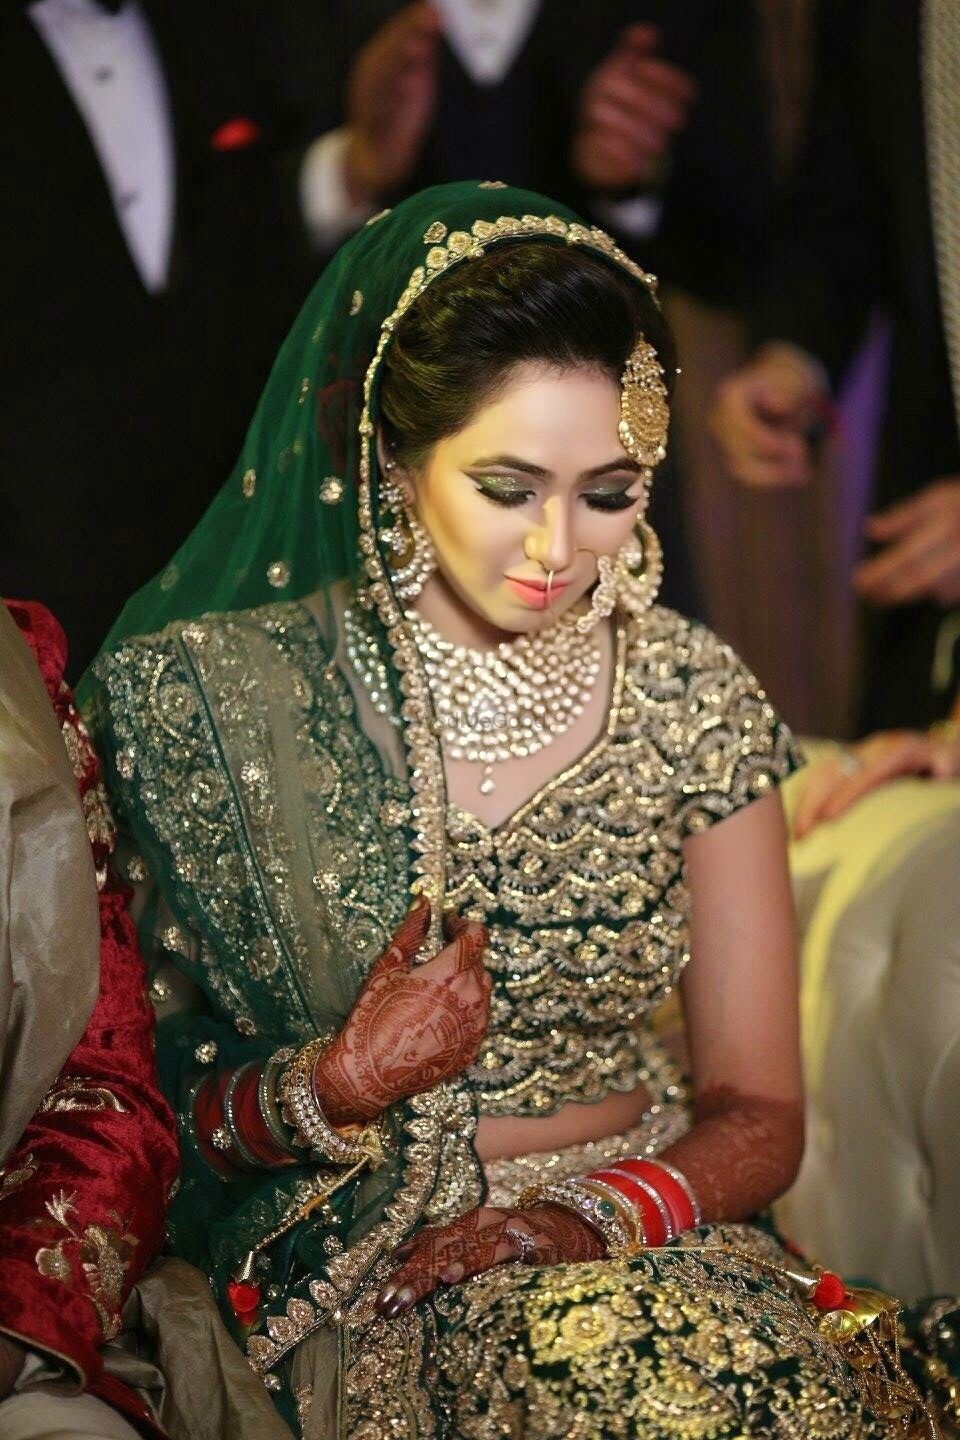 Photo By Face Tales by Akrity Malhotra - Bridal Makeup